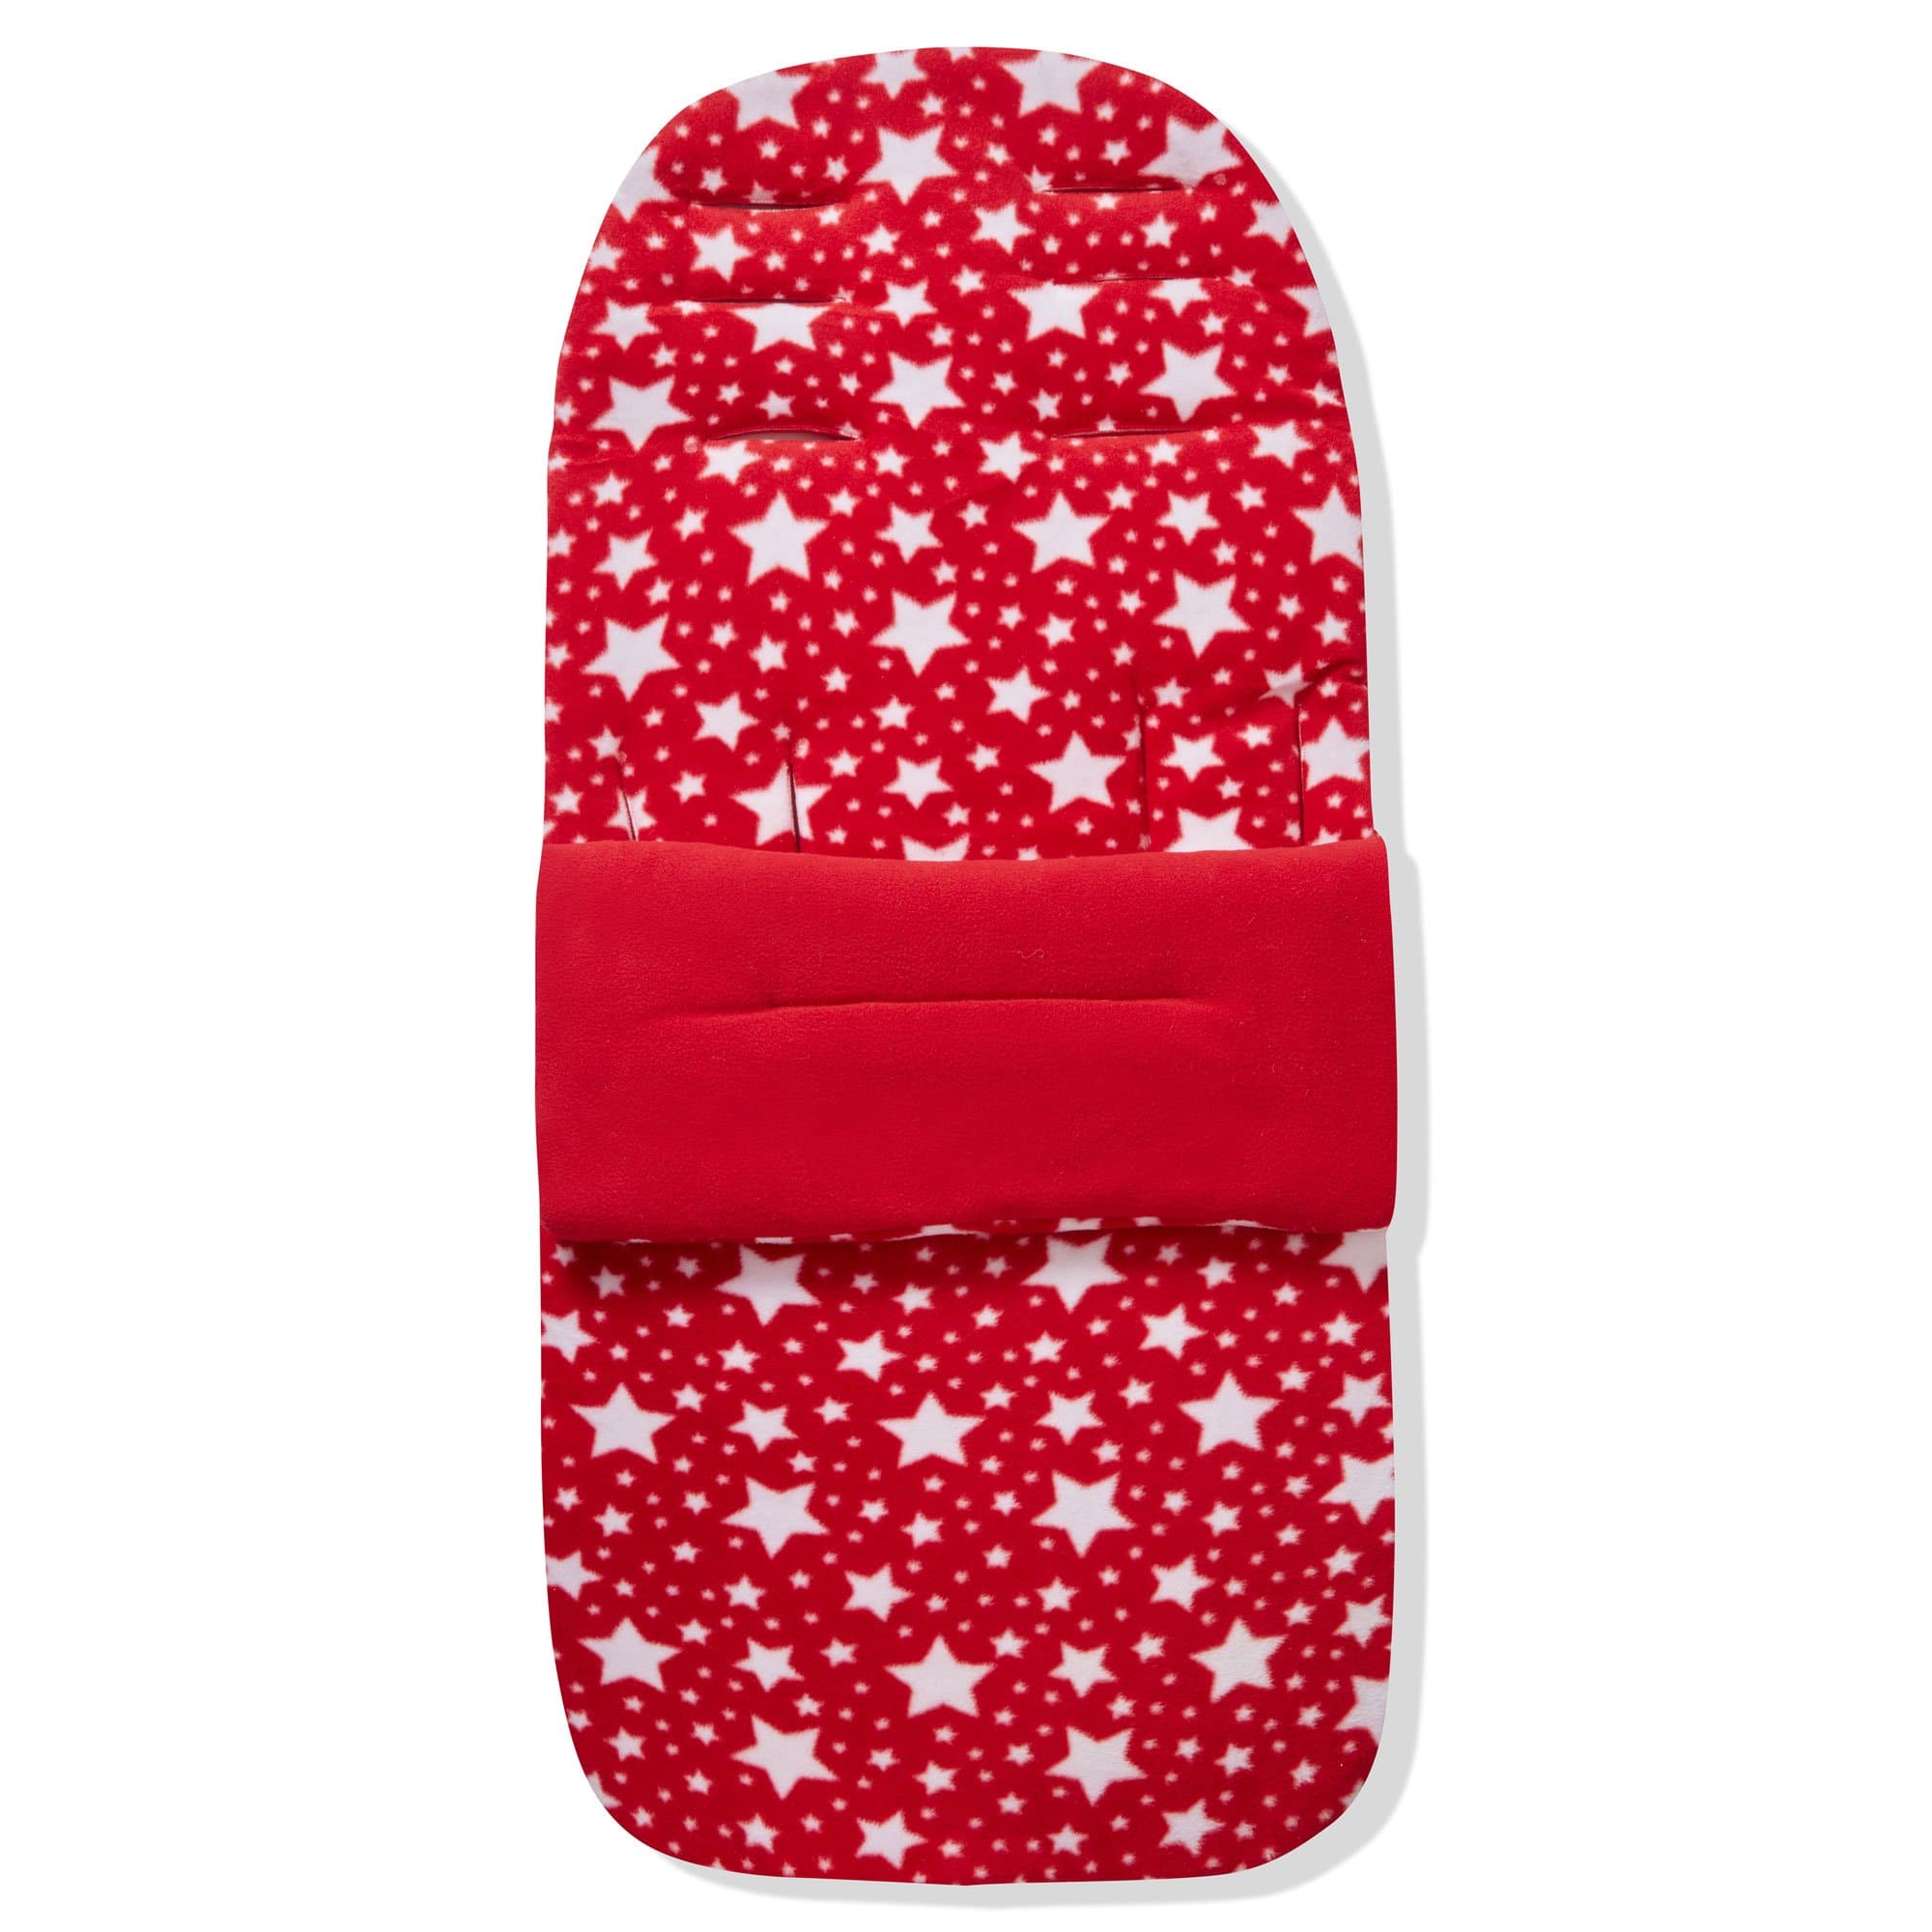 Fleece Footmuff / Cosy Toes Compatible with Norton - Red Star / Fits All Models | For Your Little One